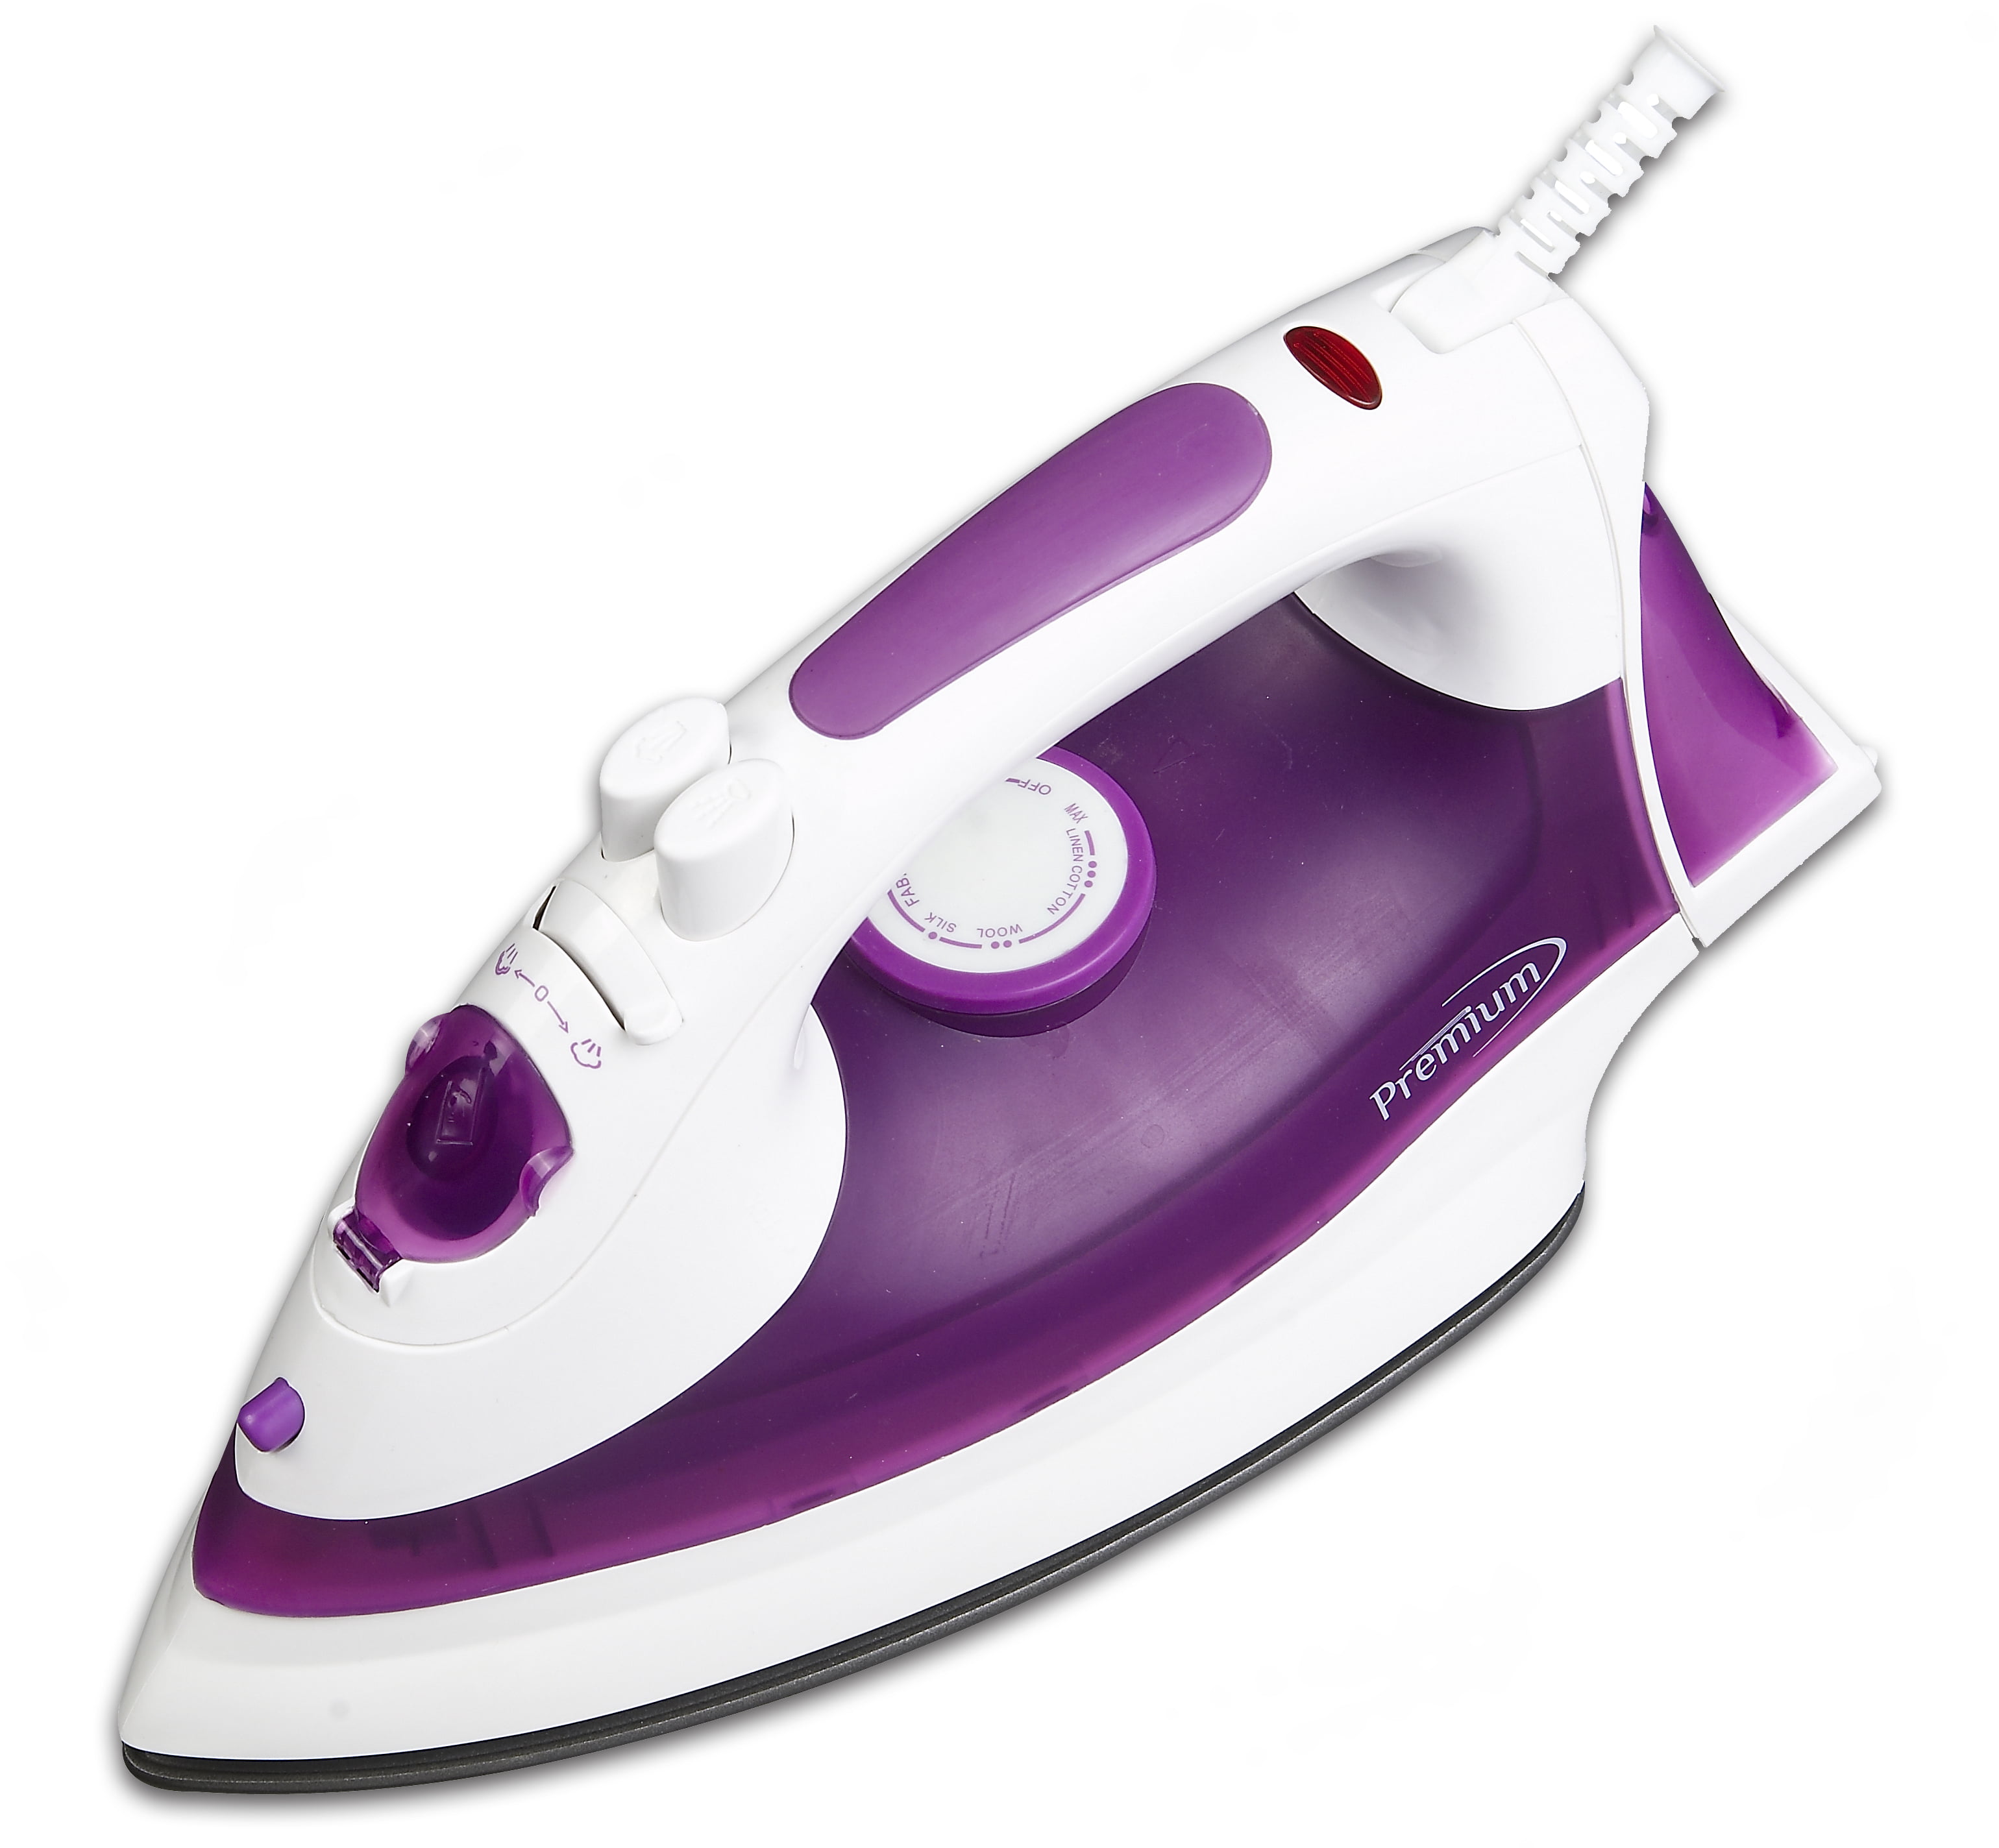 Precision Trading Piv7157 Steam And Dry Iron With Bonus Mat